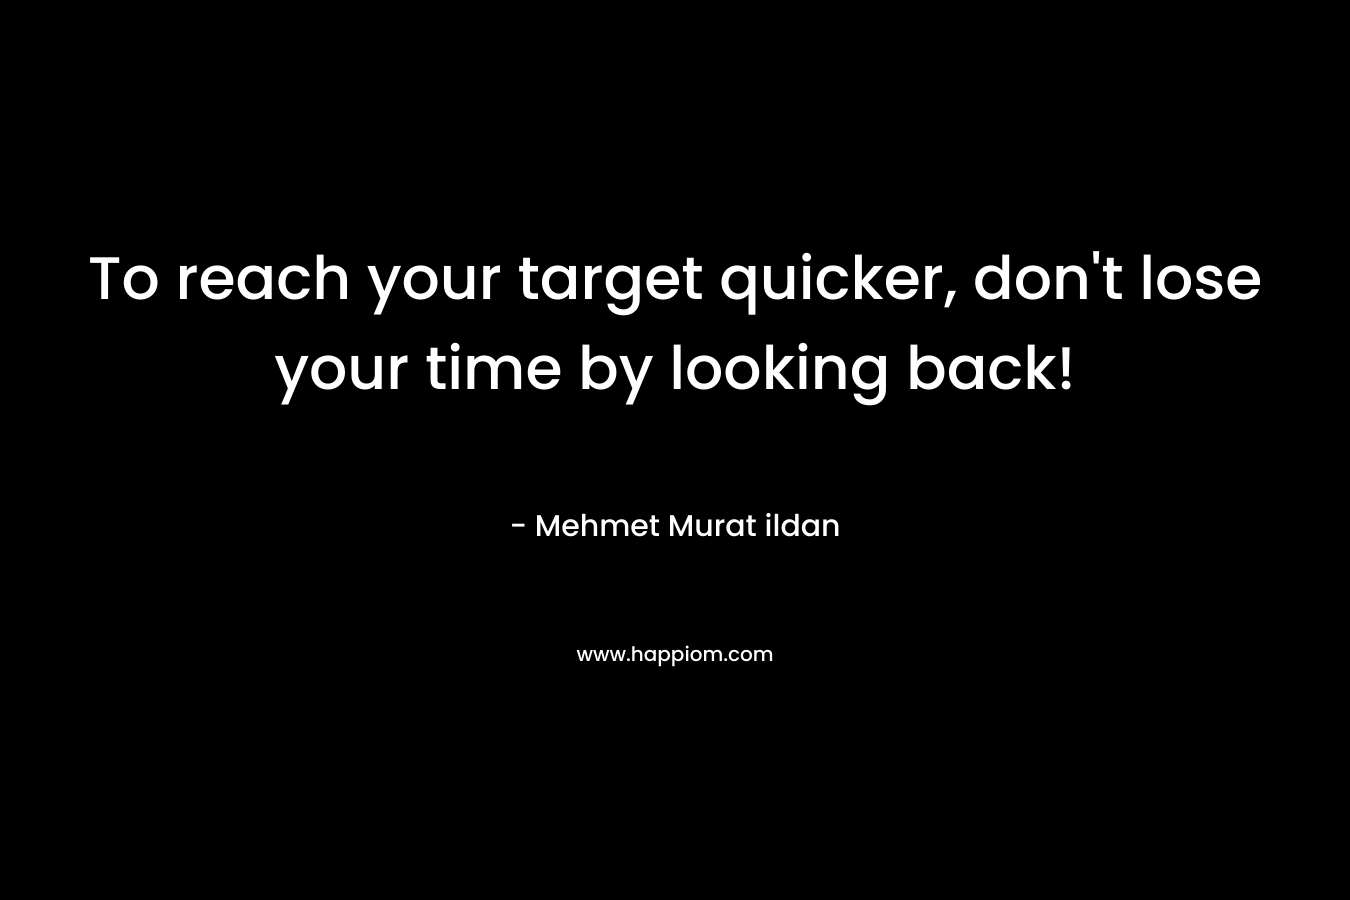 To reach your target quicker, don’t lose your time by looking back! – Mehmet Murat ildan